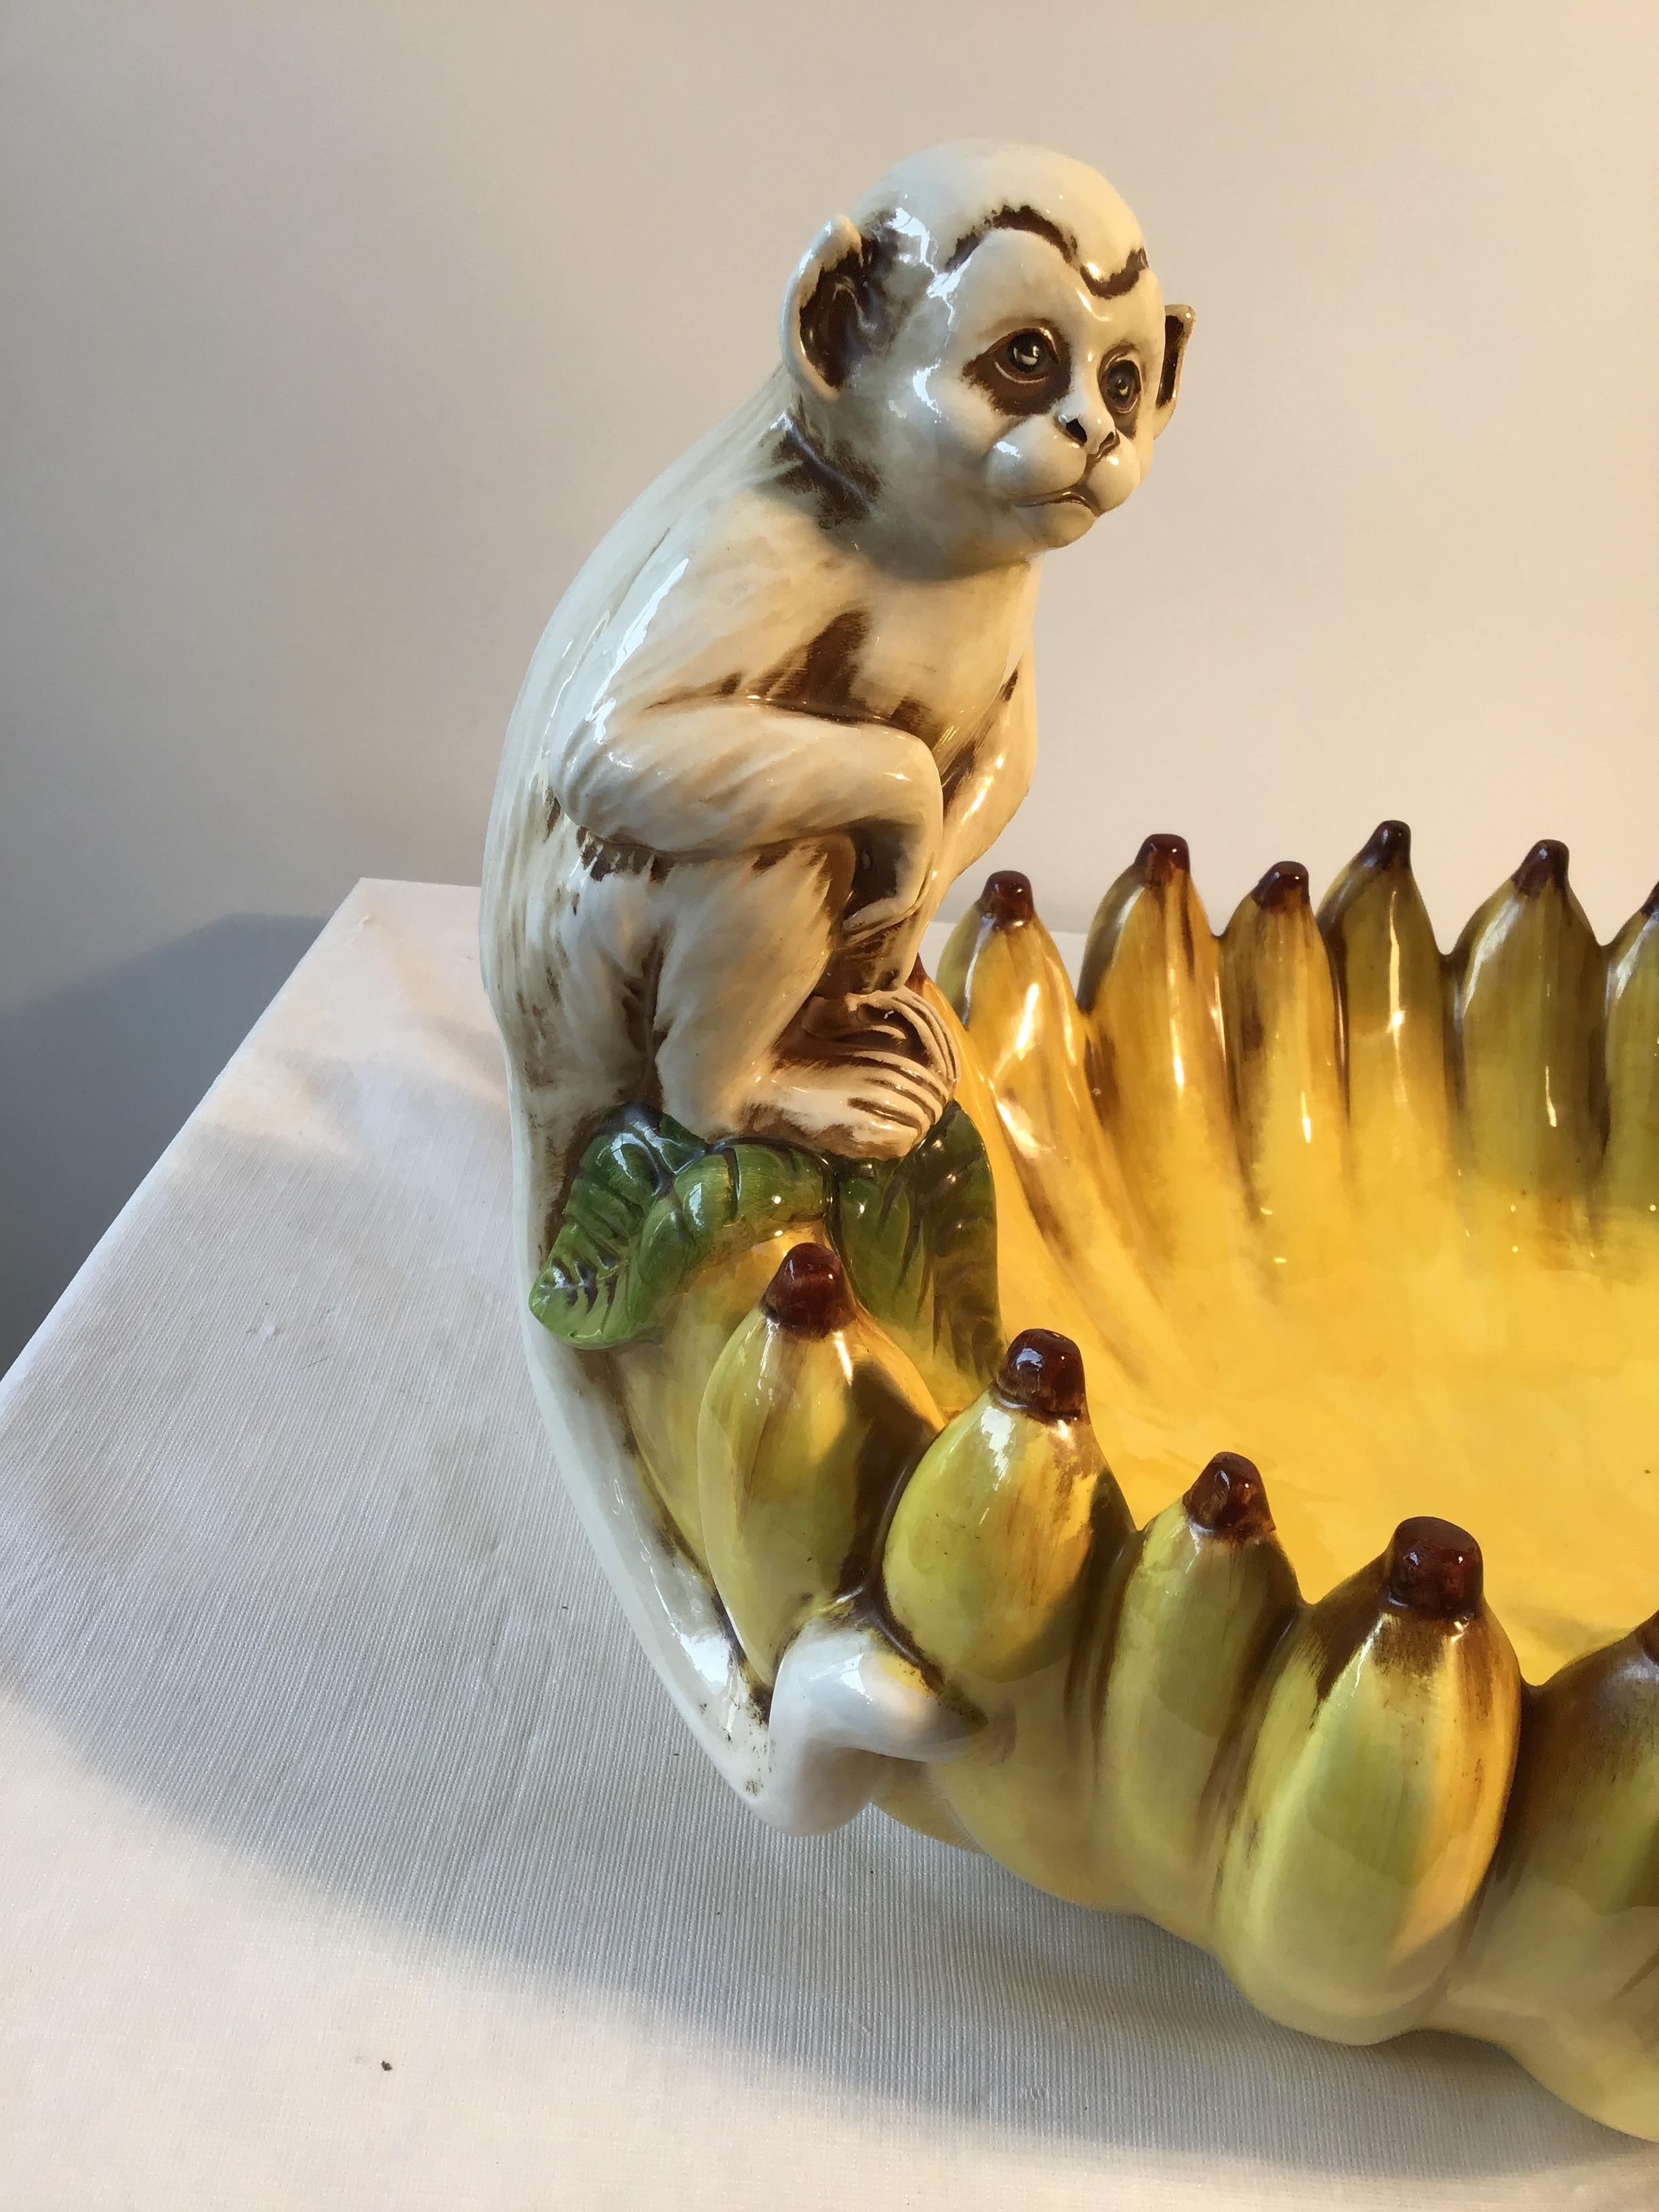 1970s Hand Painted Italian Ceramic Monkey Bowl Made for Gumps 1